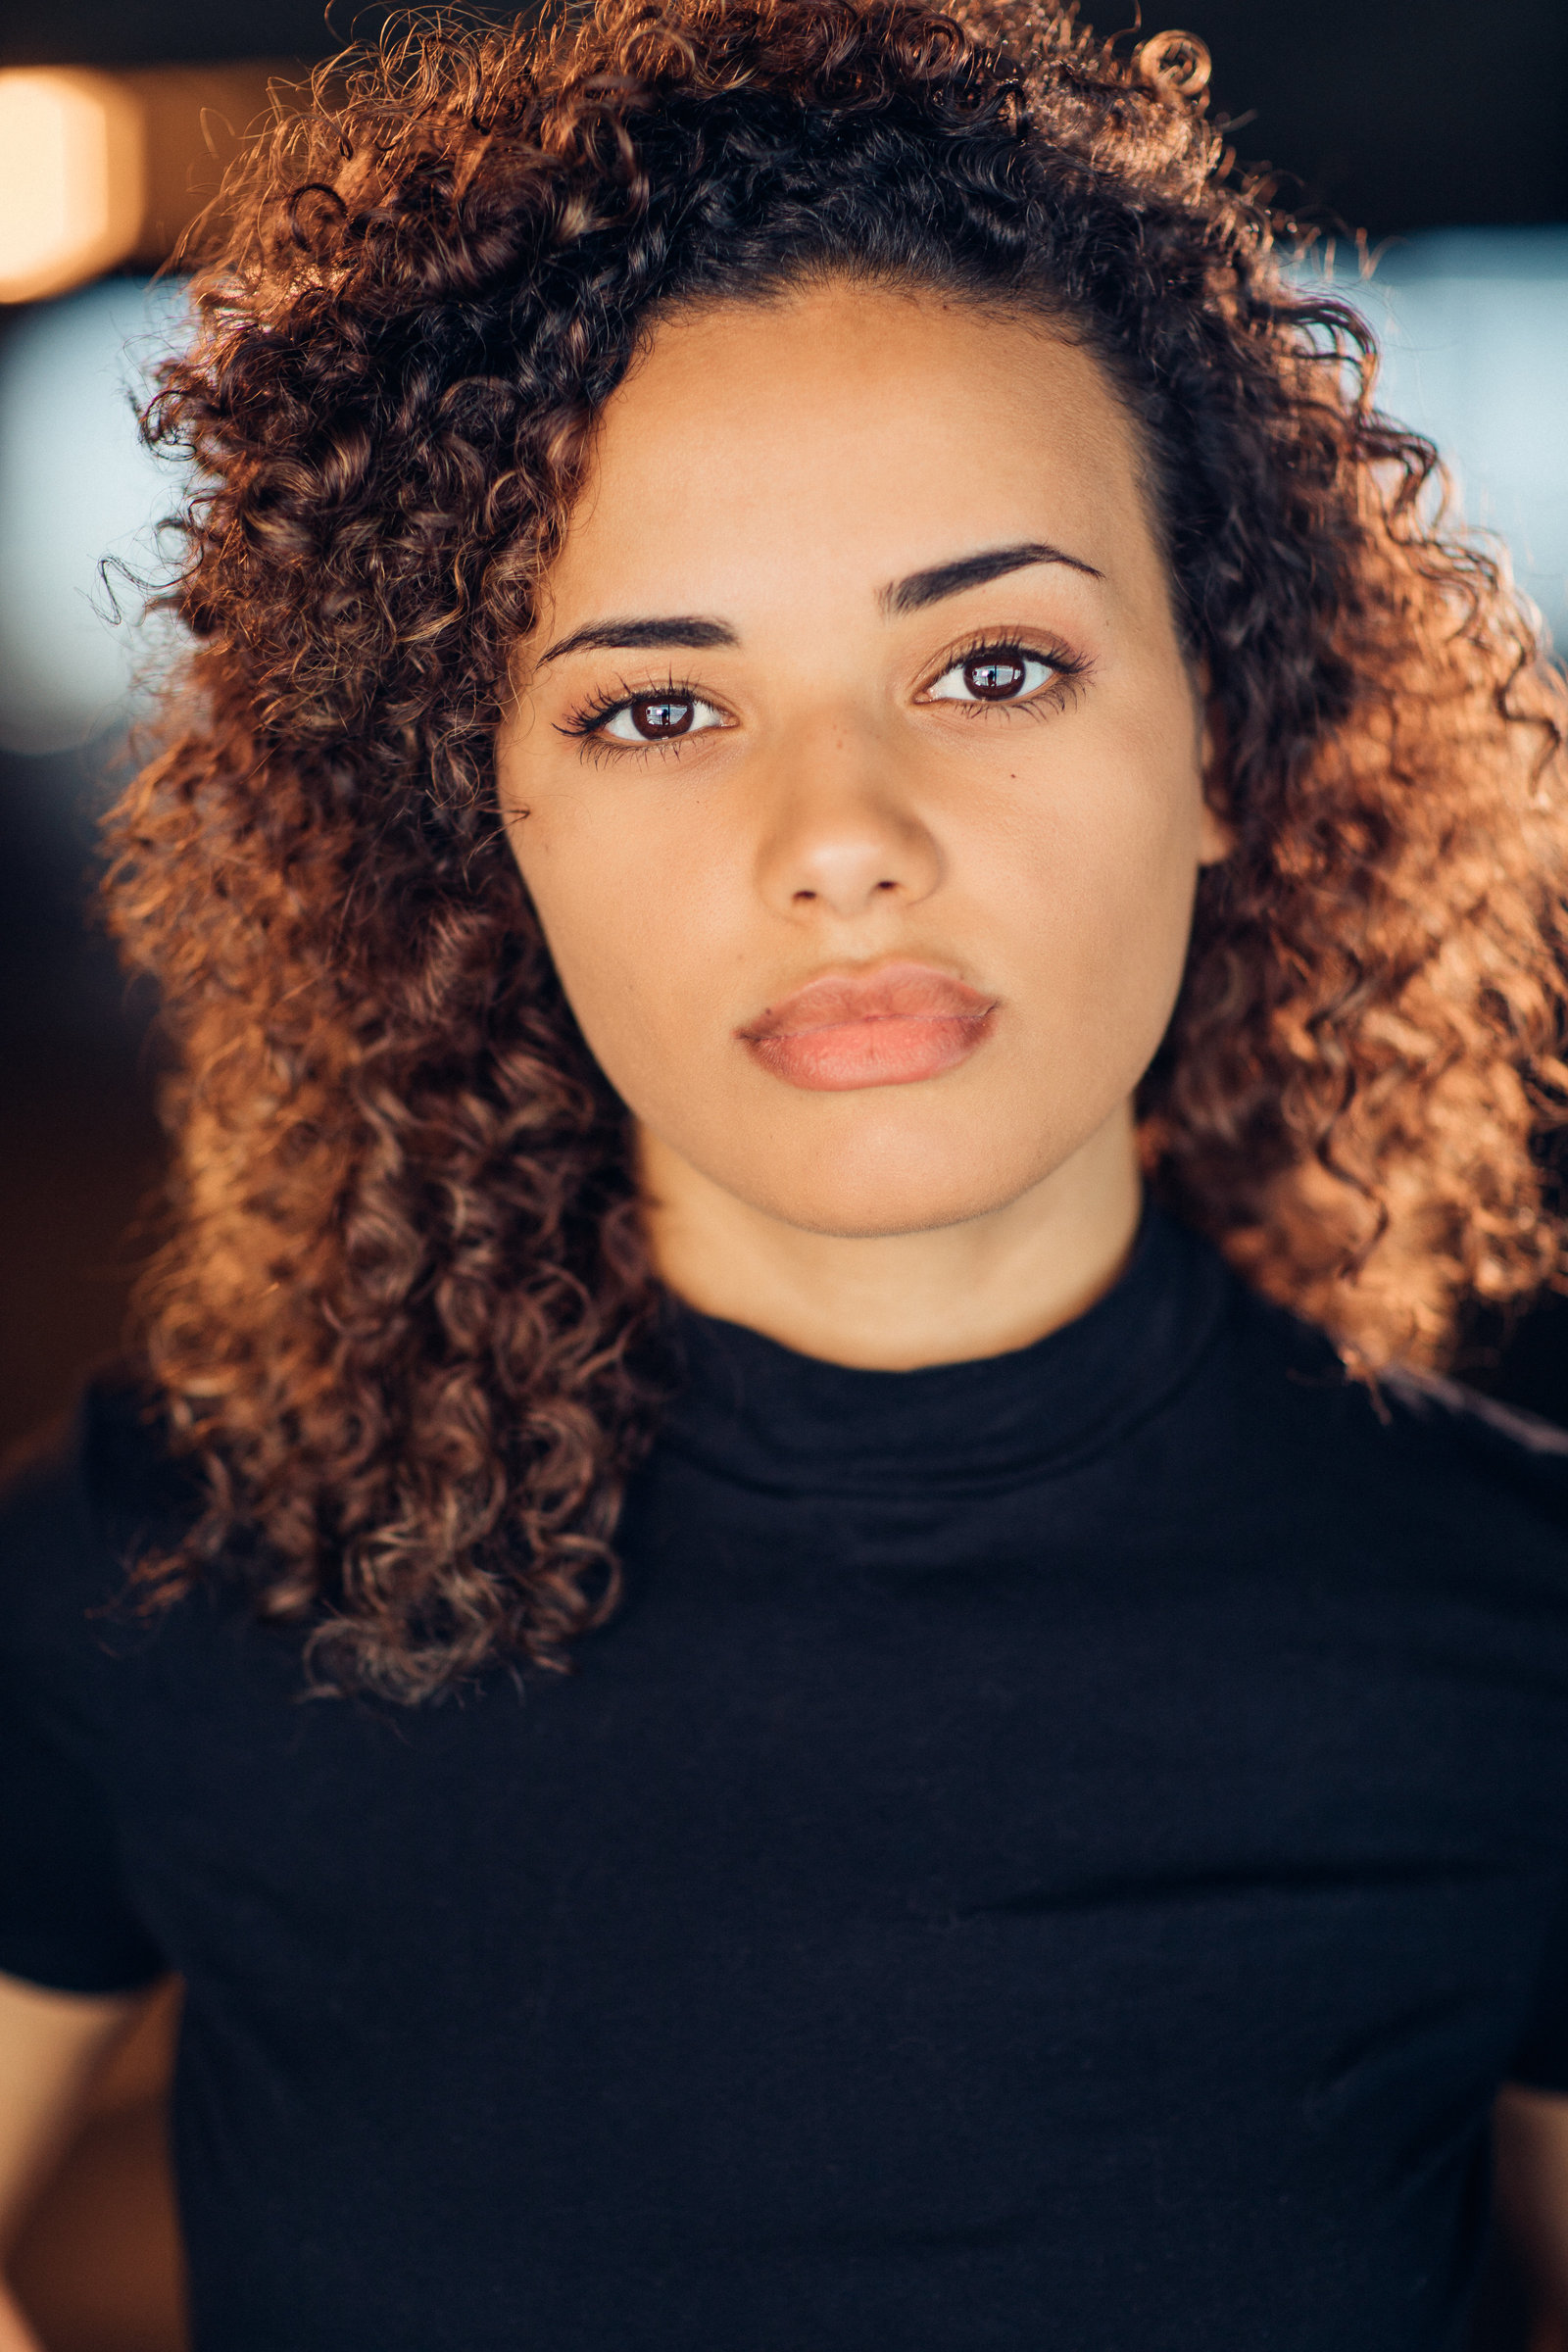 Headshot Photo Of Young Woman In Turtle Neck Shirt